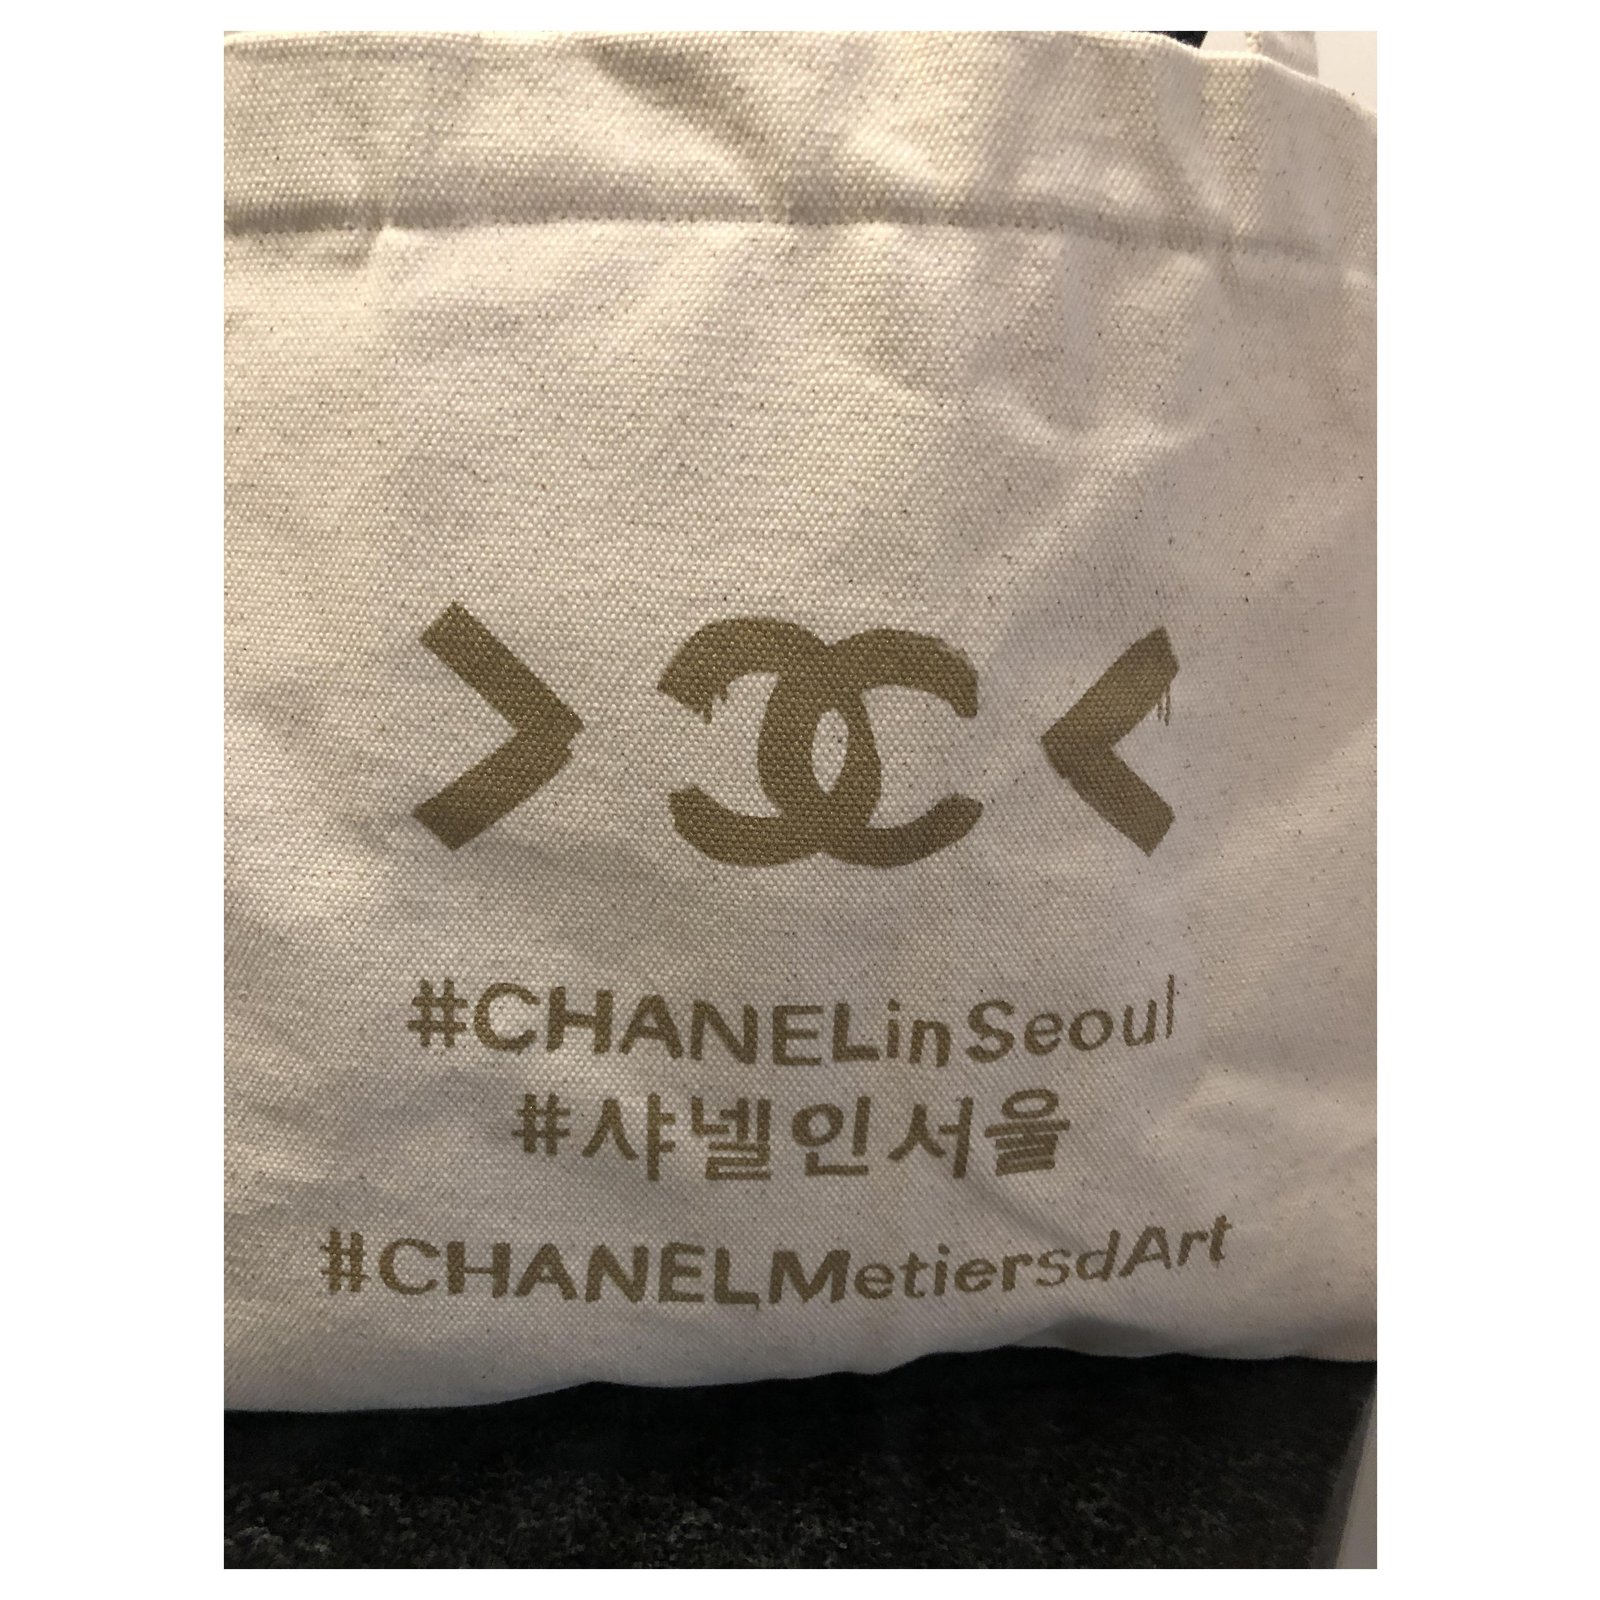 NEW Chanel VIP Gift Canvas Tote bag limited edition Nepal